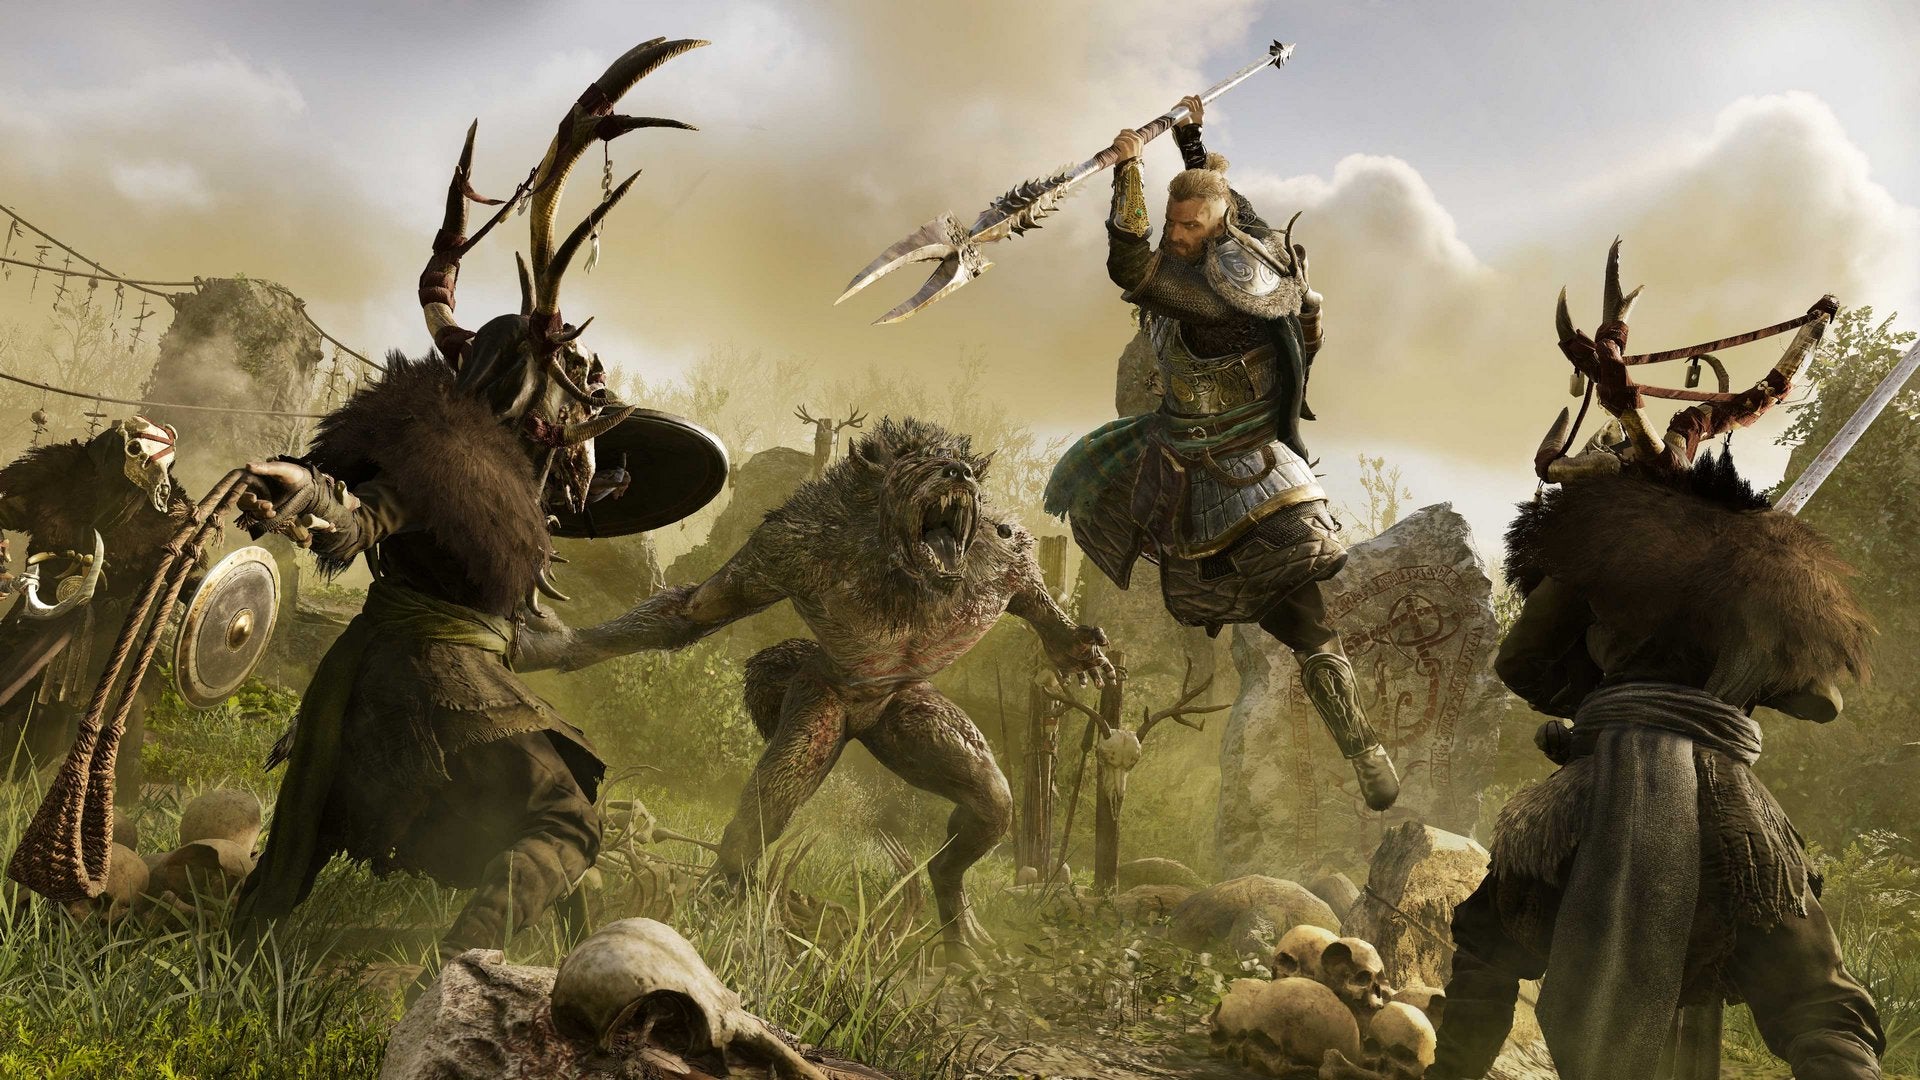 Image for Assassin’s Creed Valhalla's first DLC expansion, Wrath of the Druids, is out now